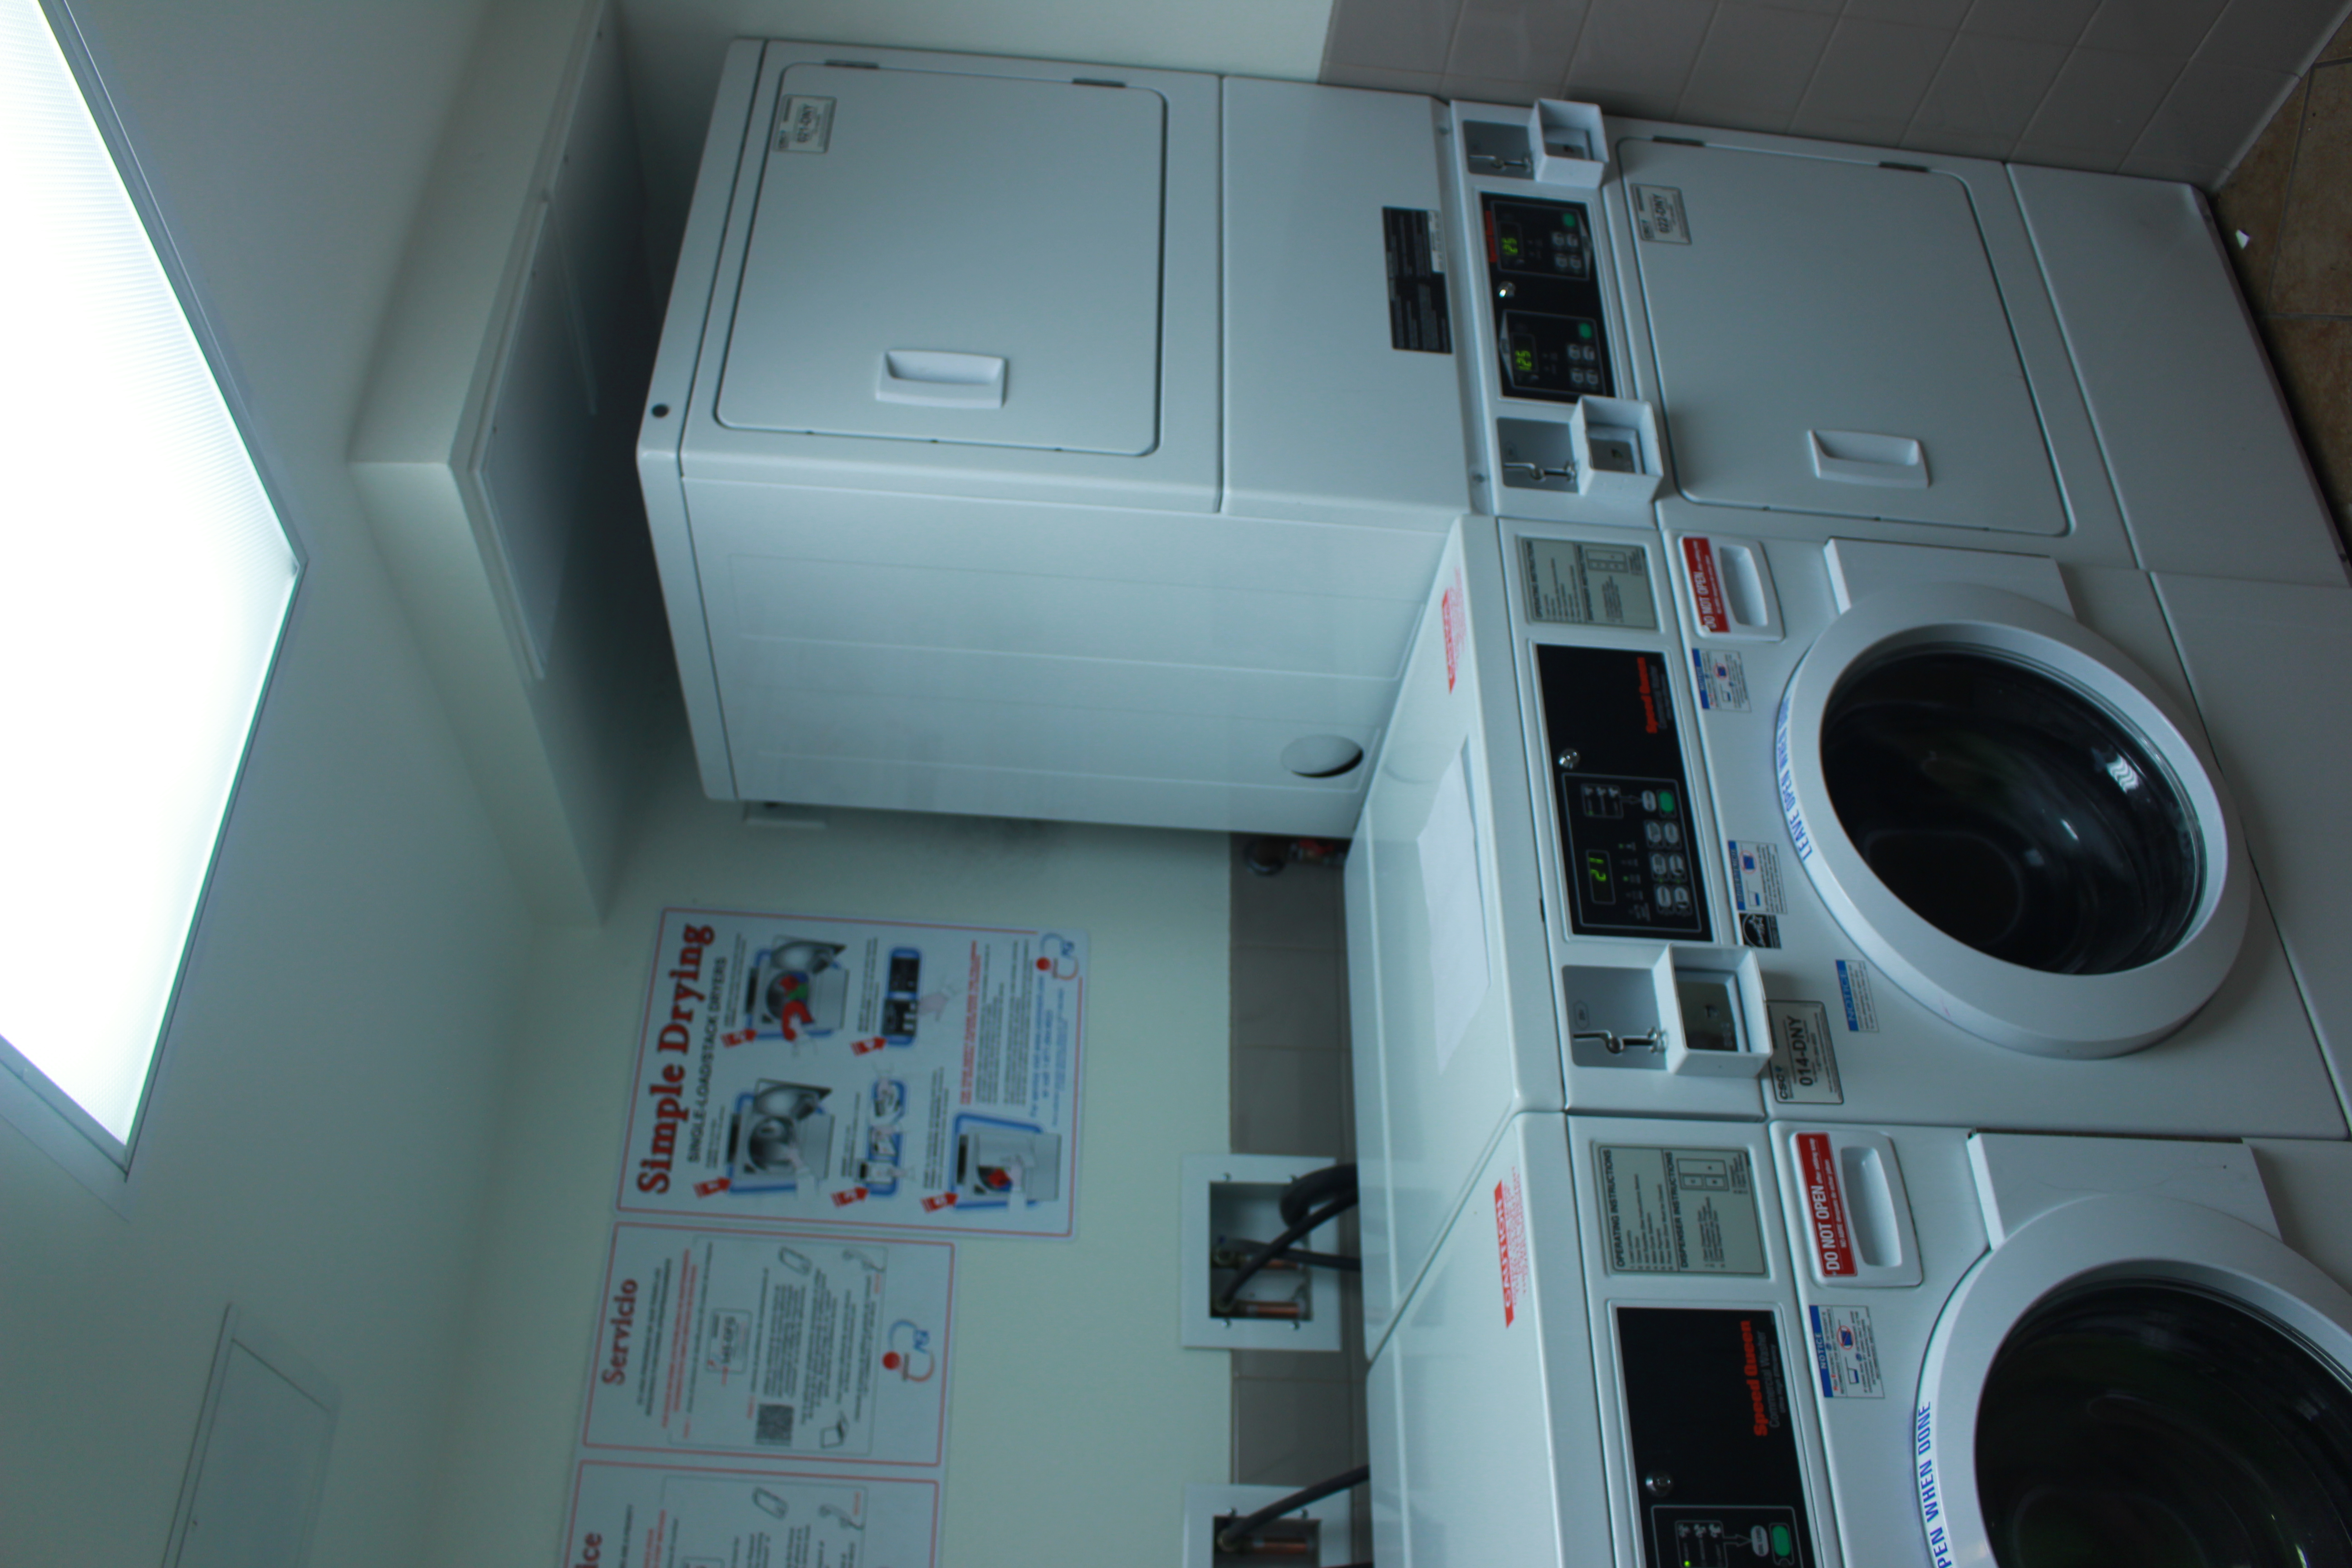 Two white washers and two white dryers, service and instructions signs on the wall.